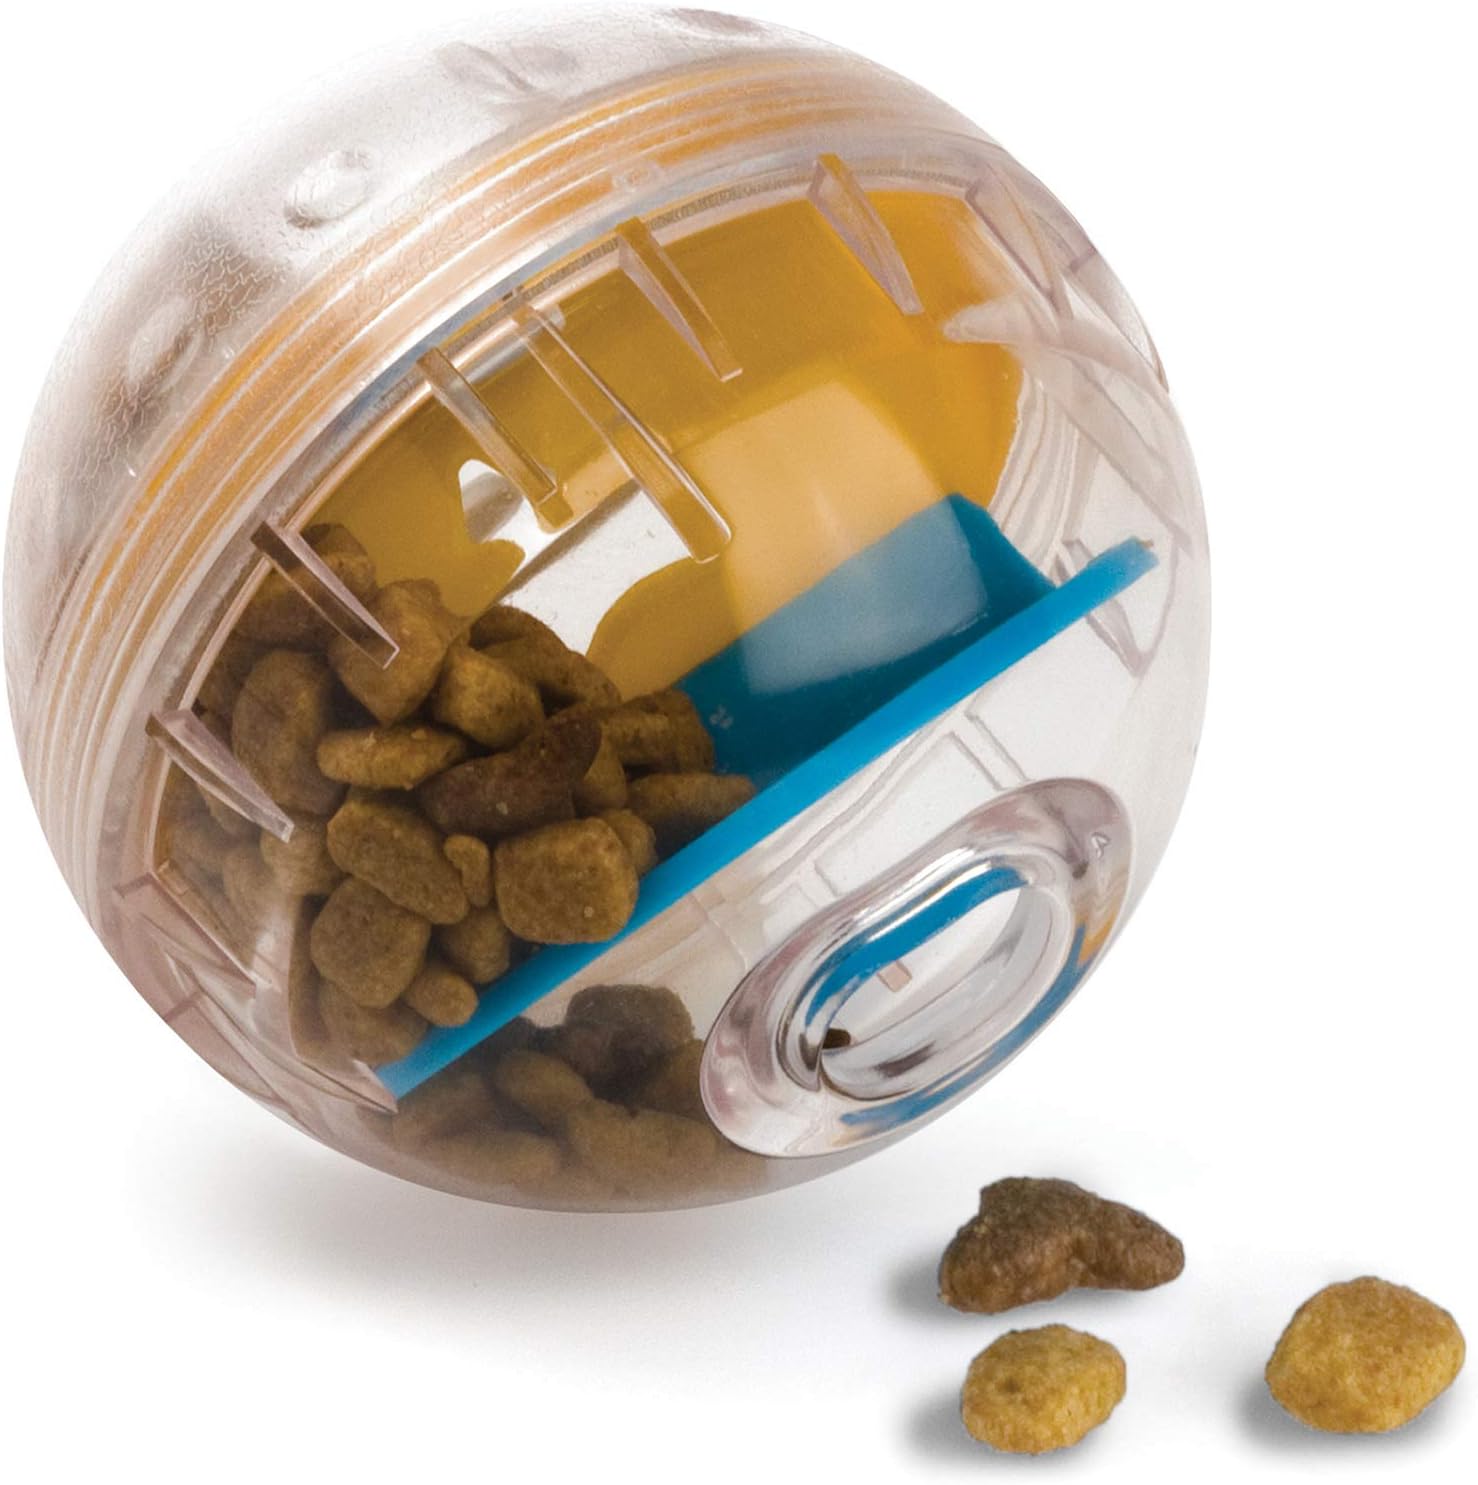 An Inside Look at Food Dispensing Toys for Dogs – Center for